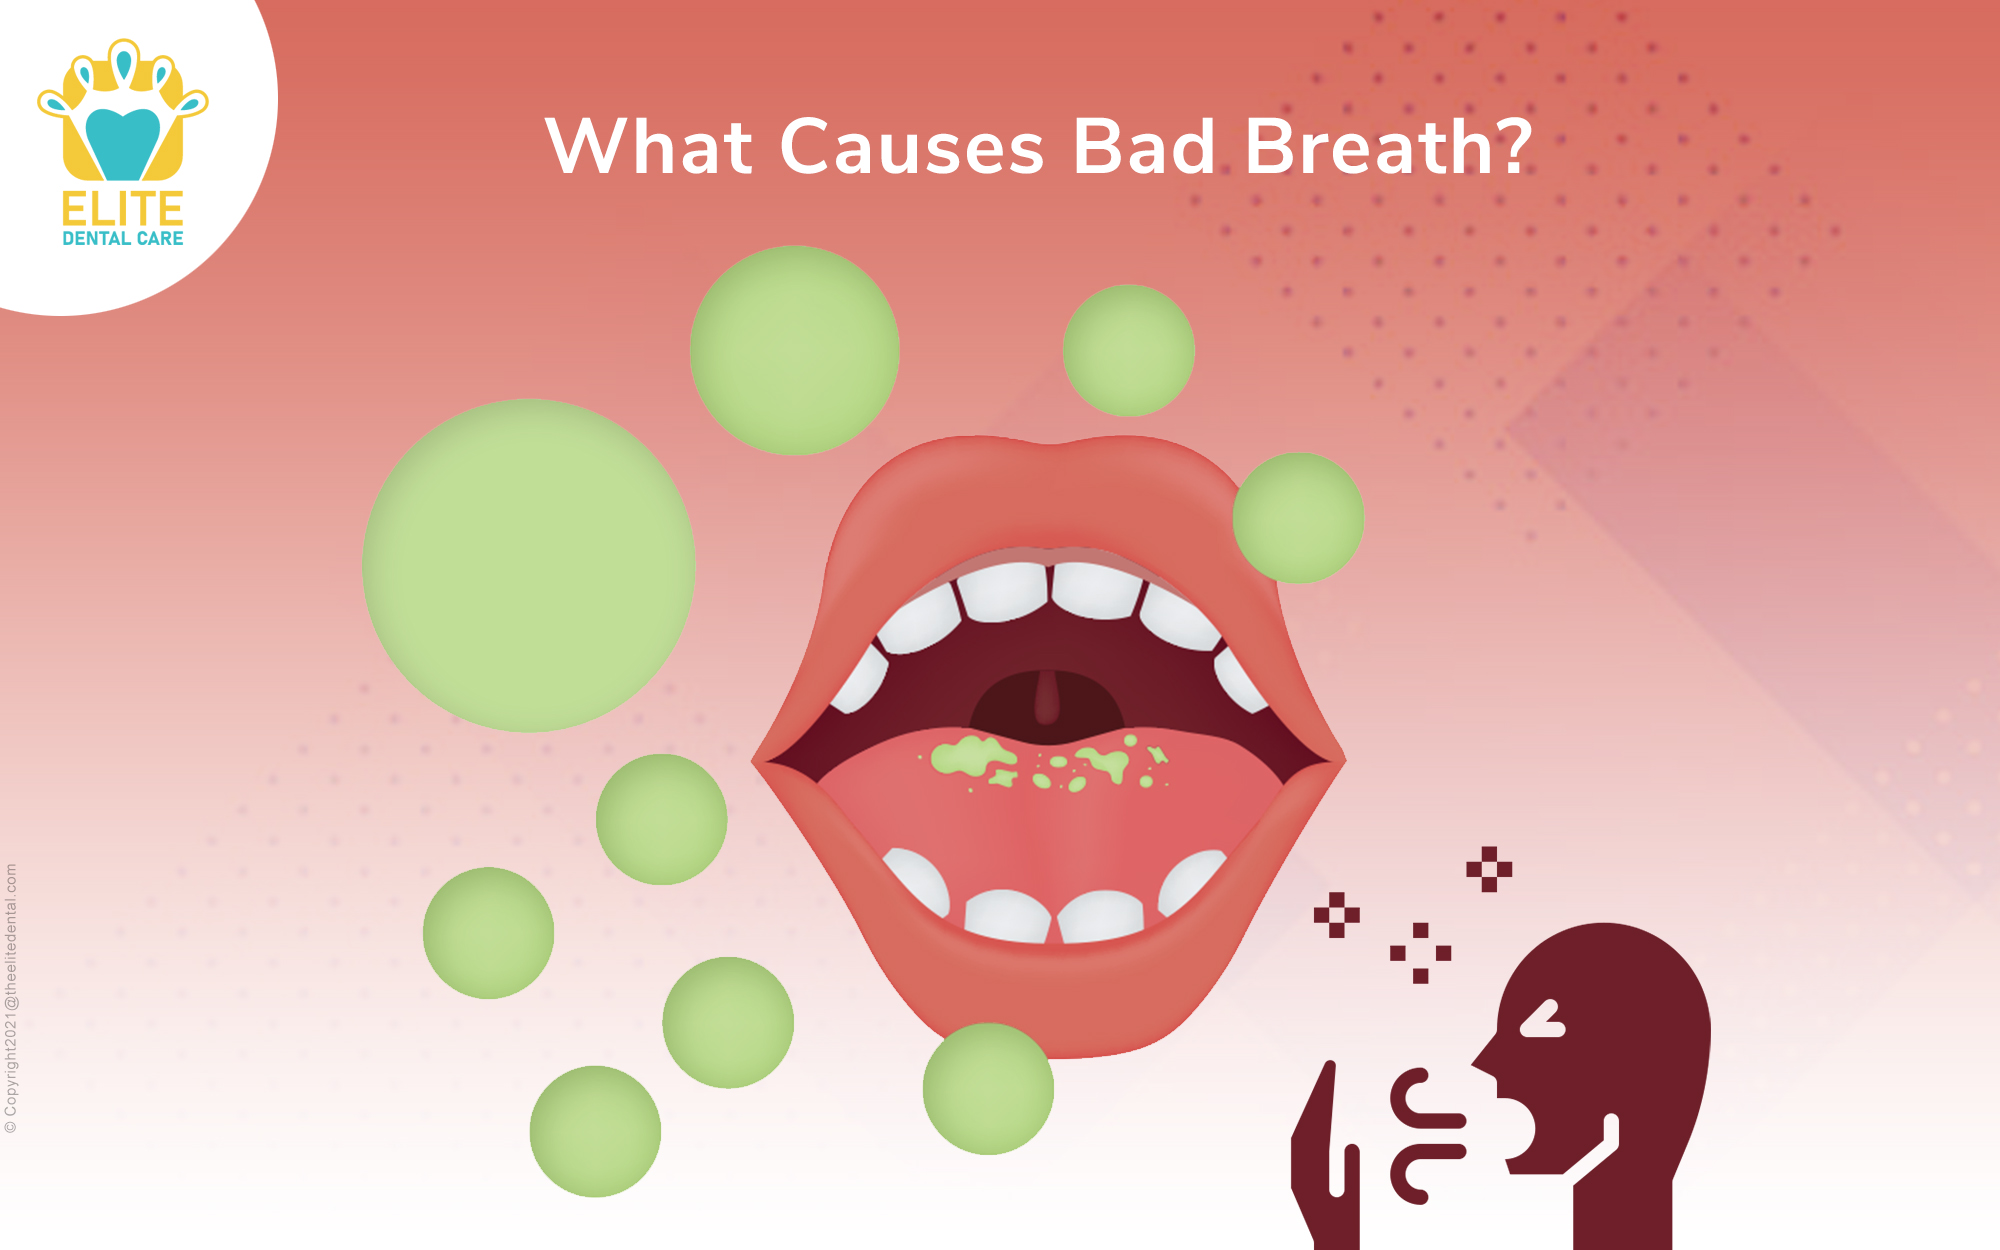 How to prevent Bad Breath?